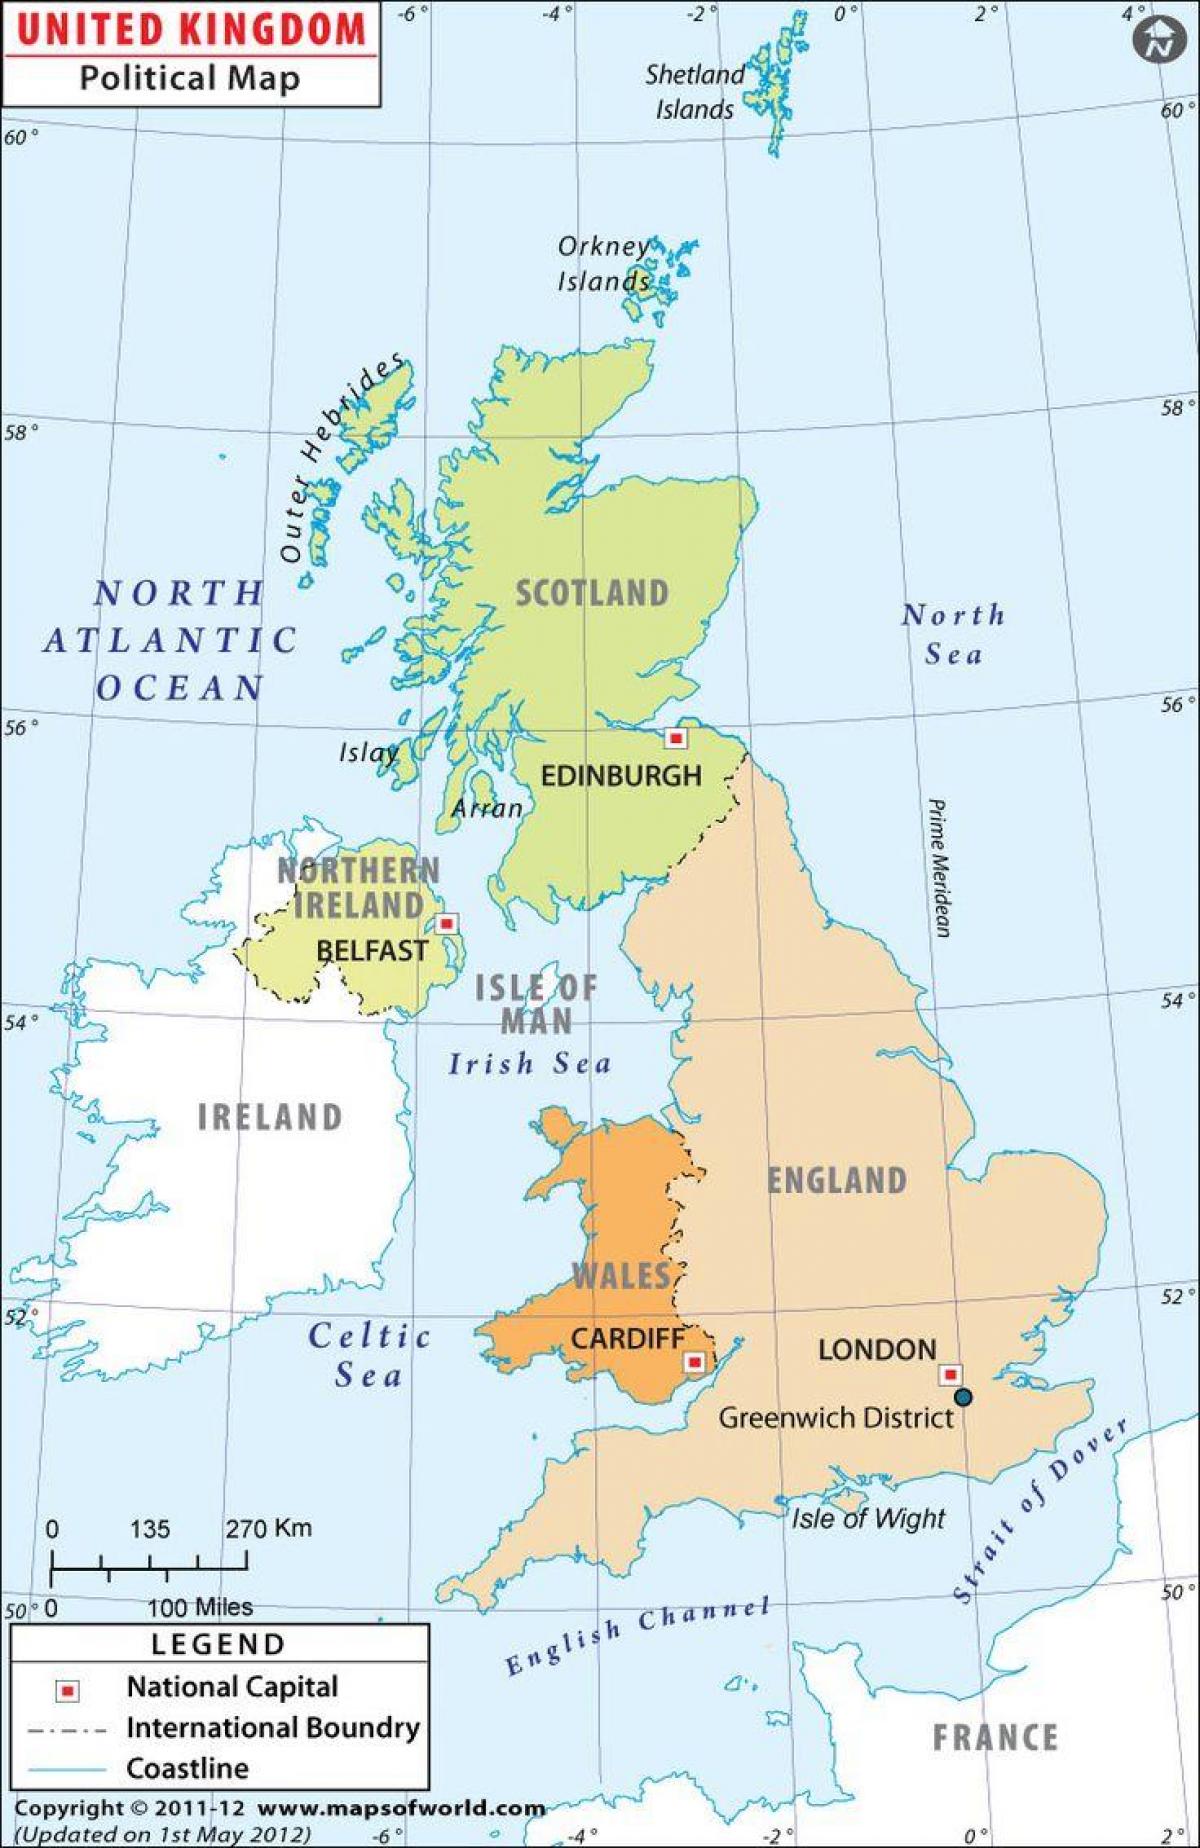 map of UK showing capital cities